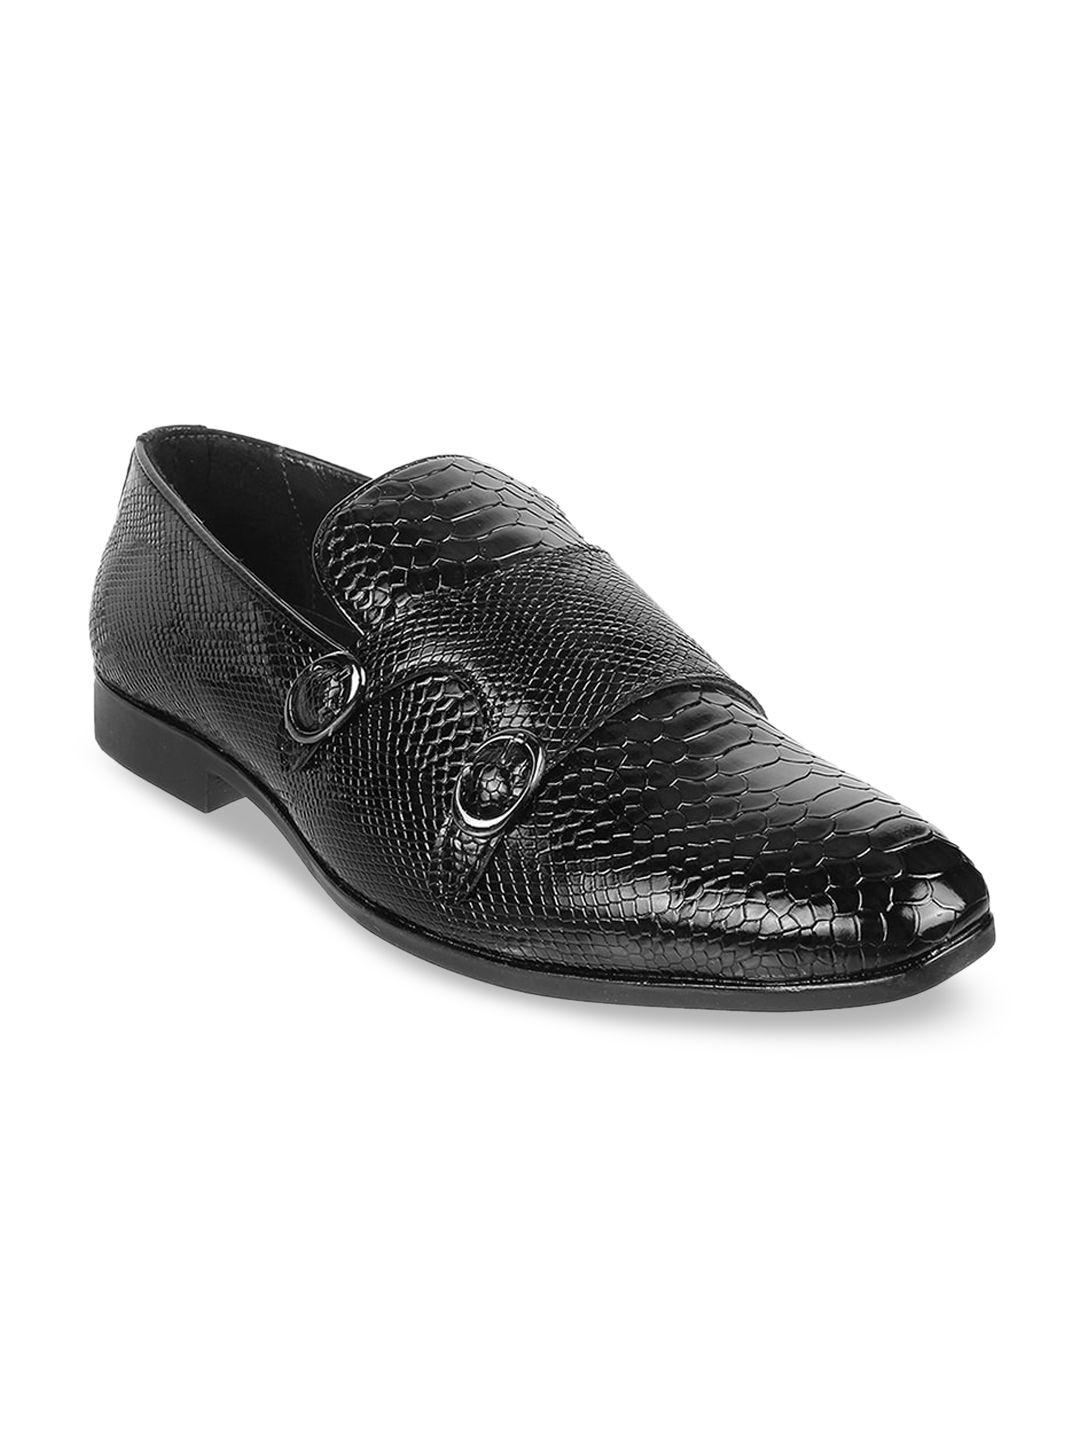 metro men textured formal monk shoes with buckle detail